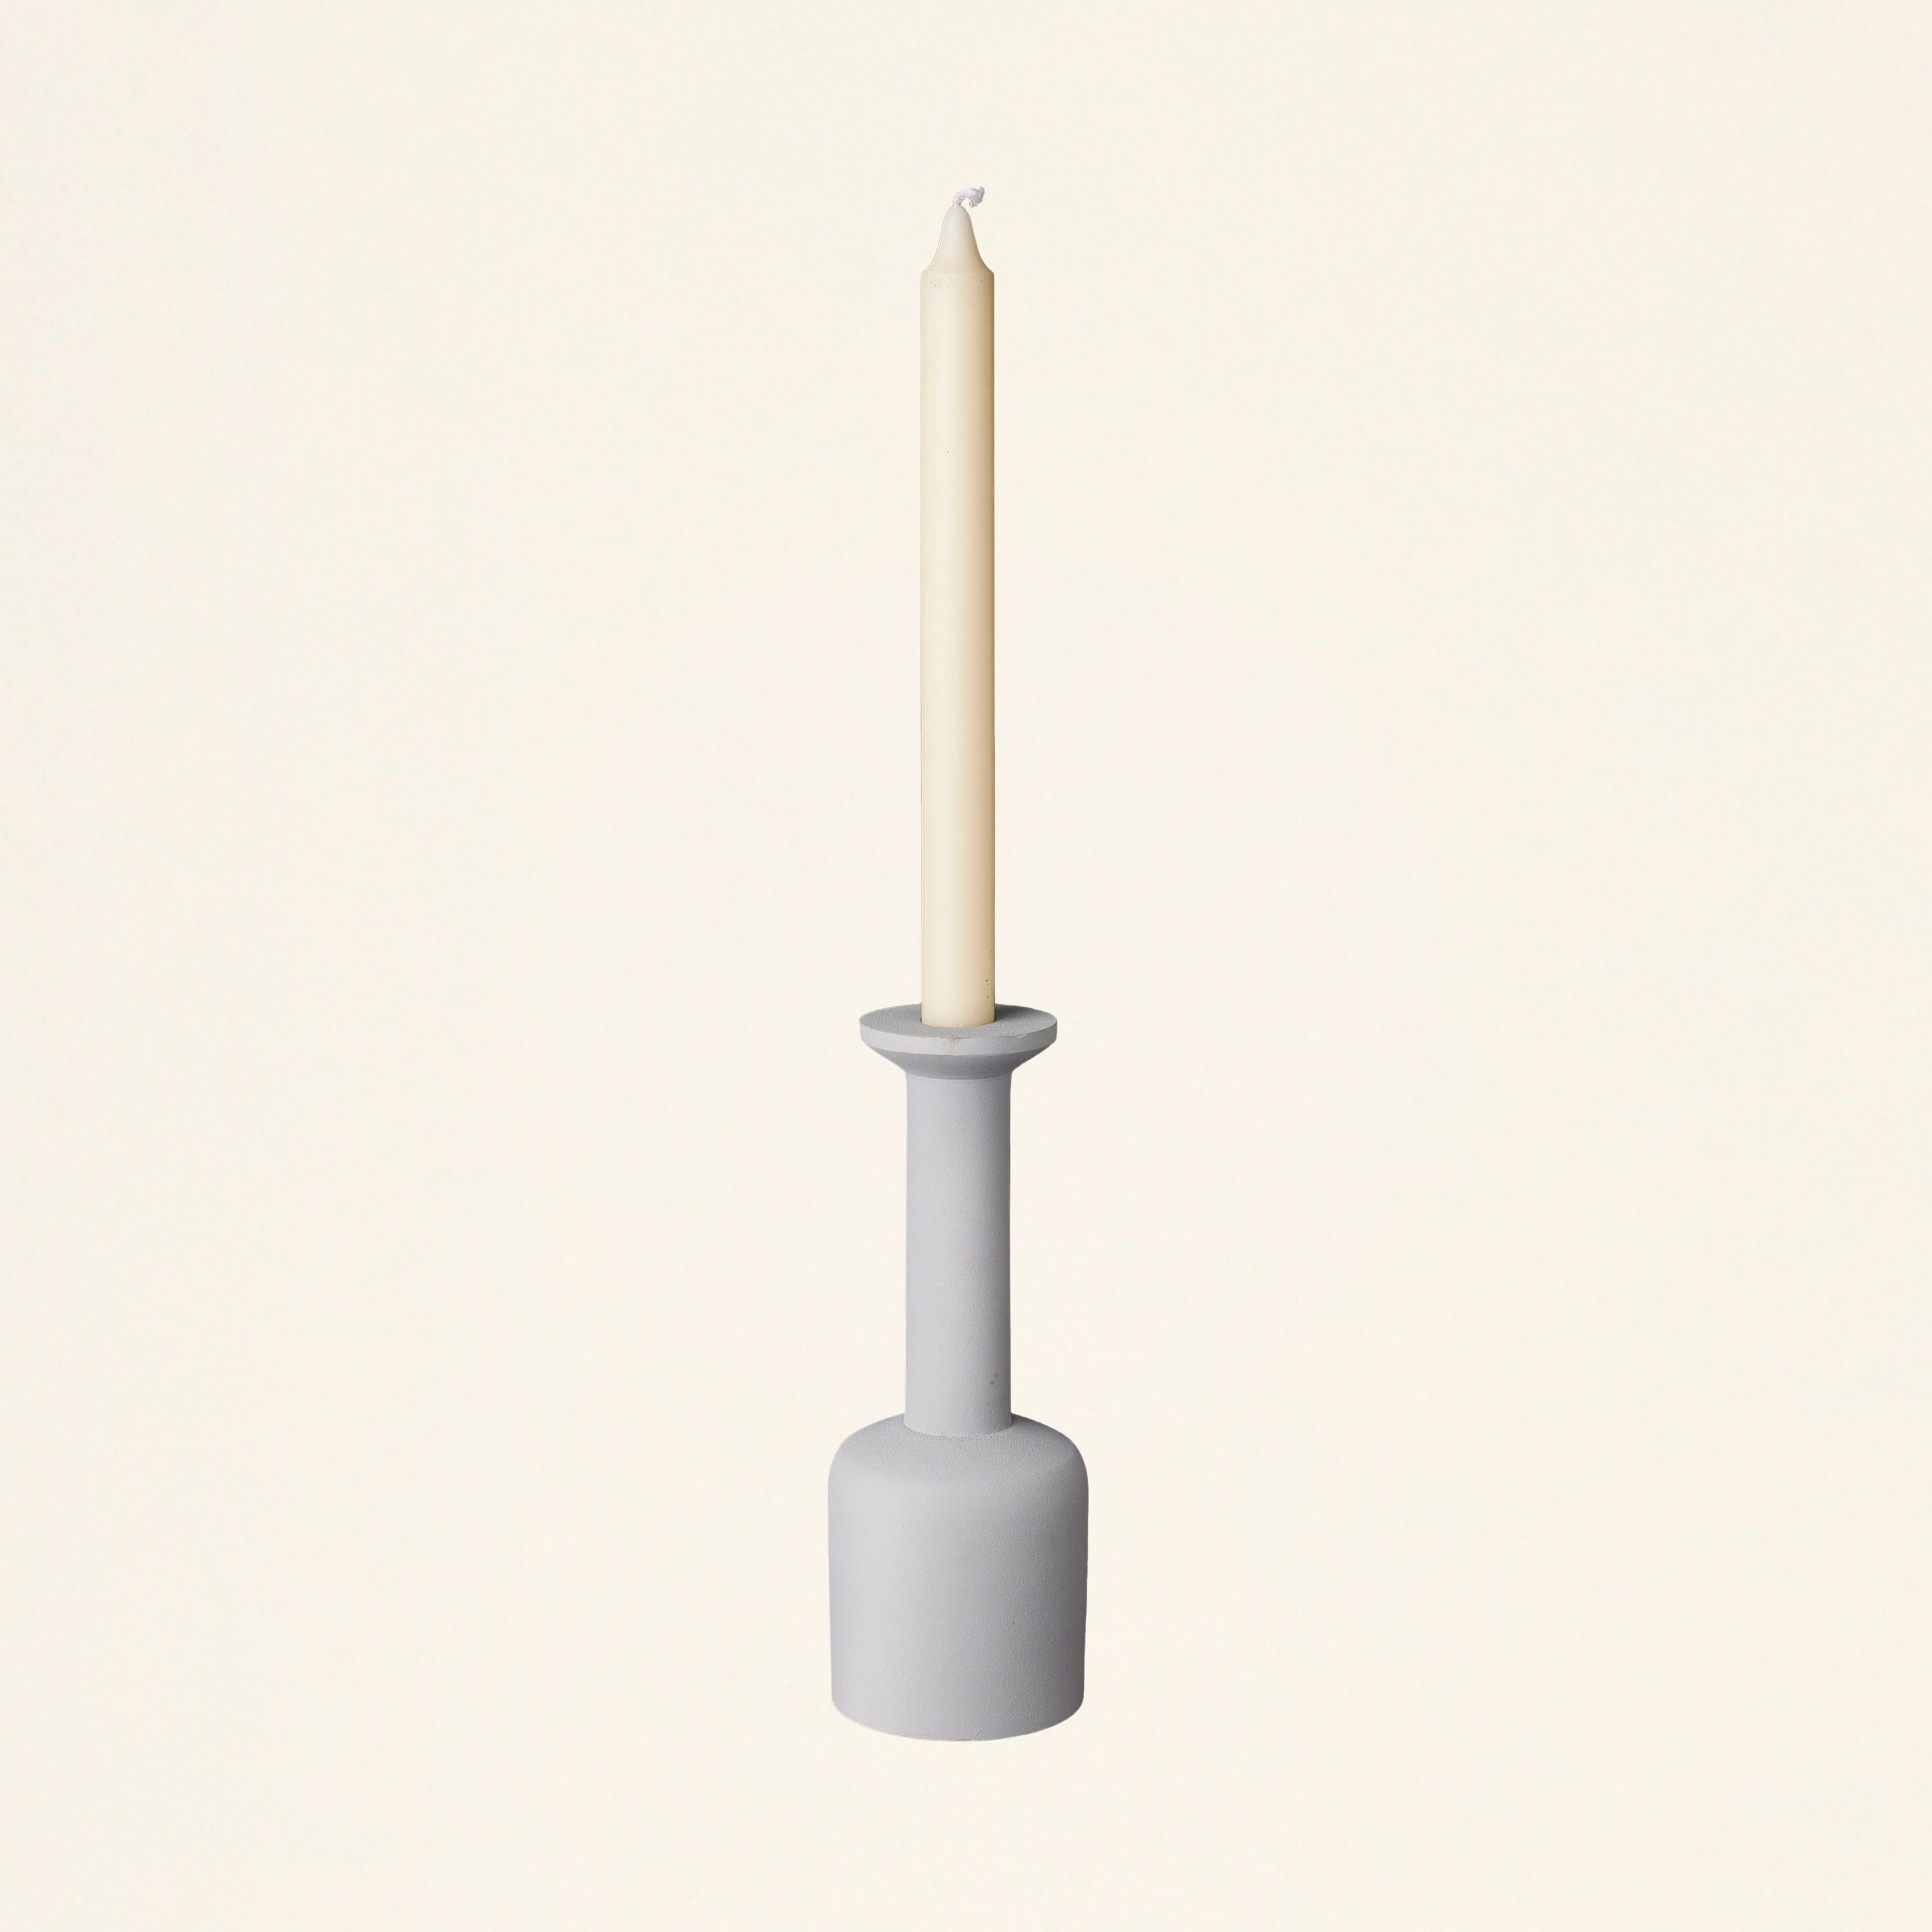 Pyrgos Taper Candle Holders